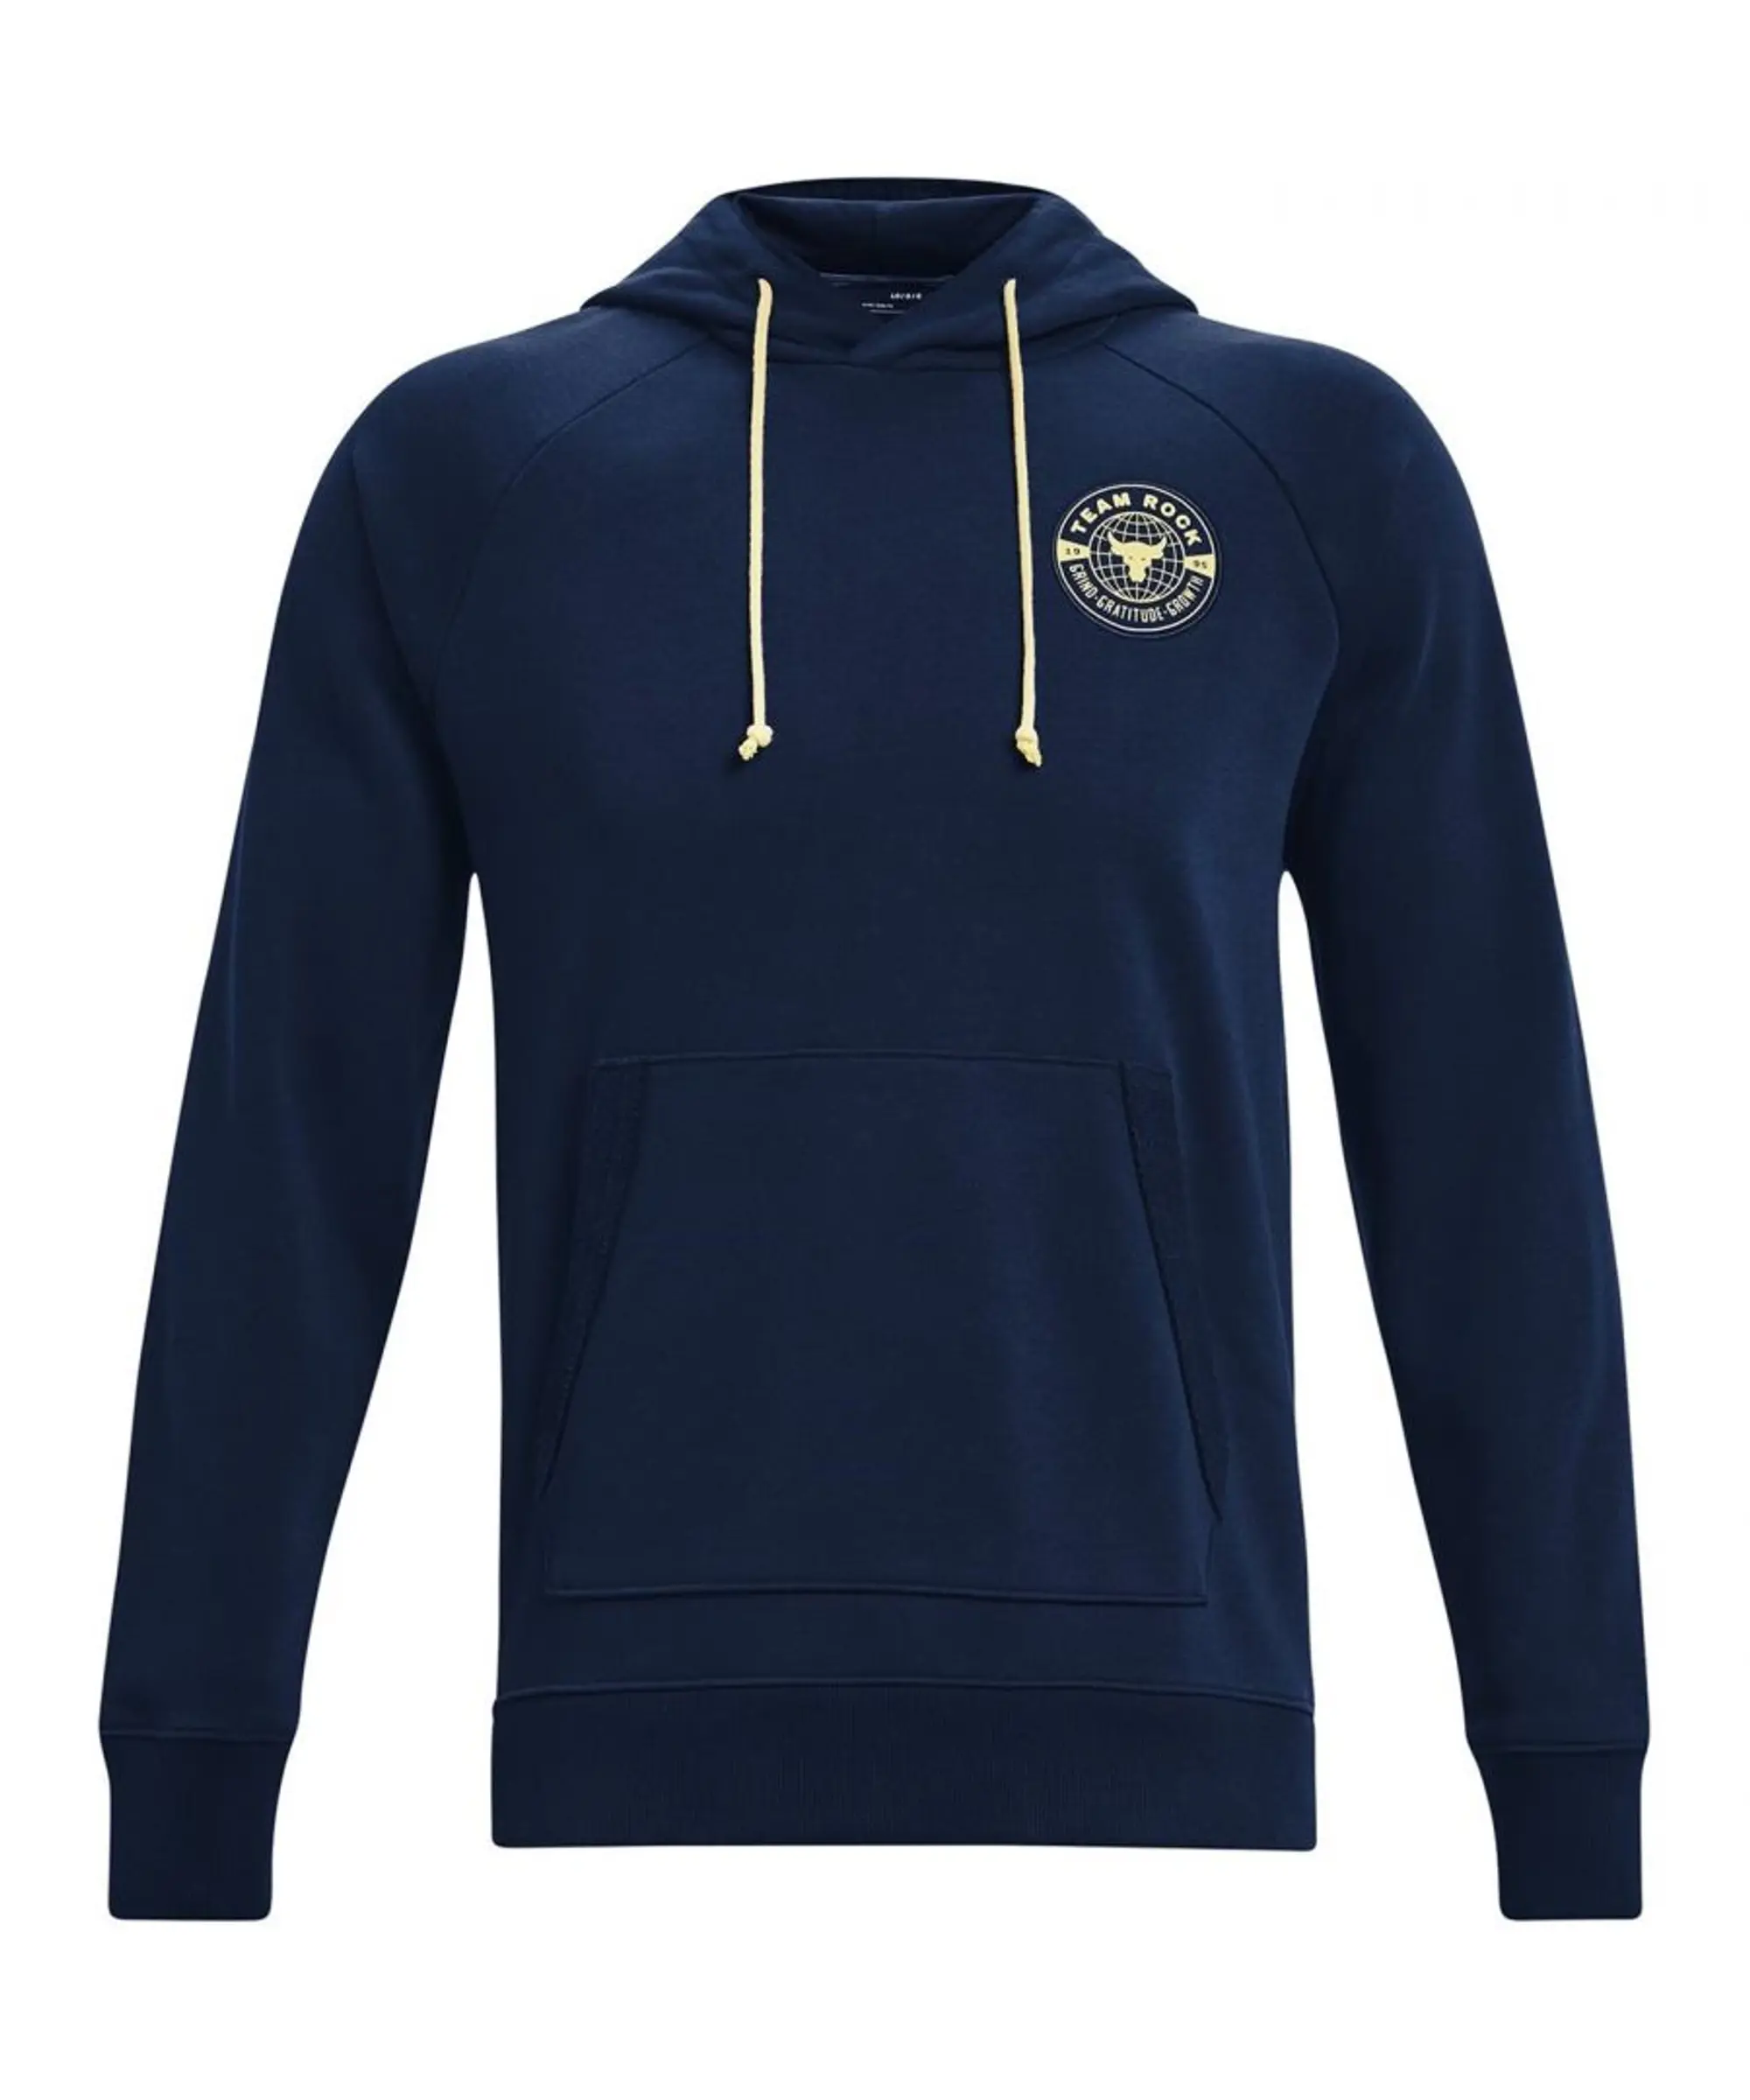 Under Armour Mens Project Rock Hoodie - Navy Cotton